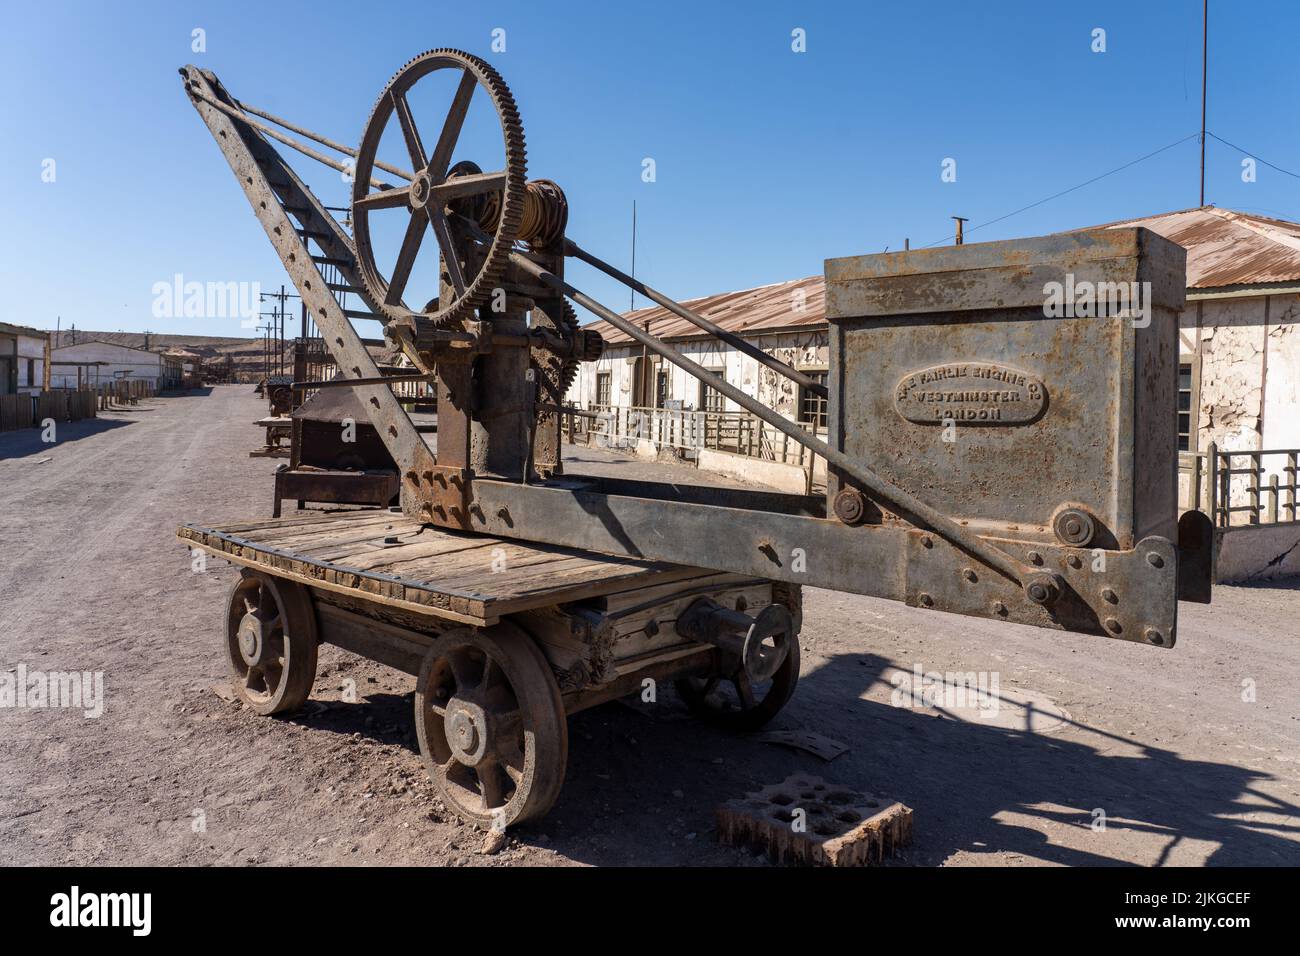 Outdoor museum display of an old lifting crane on rail tracks used in the saltpeter works in Humberstone, Chile. Stock Photo